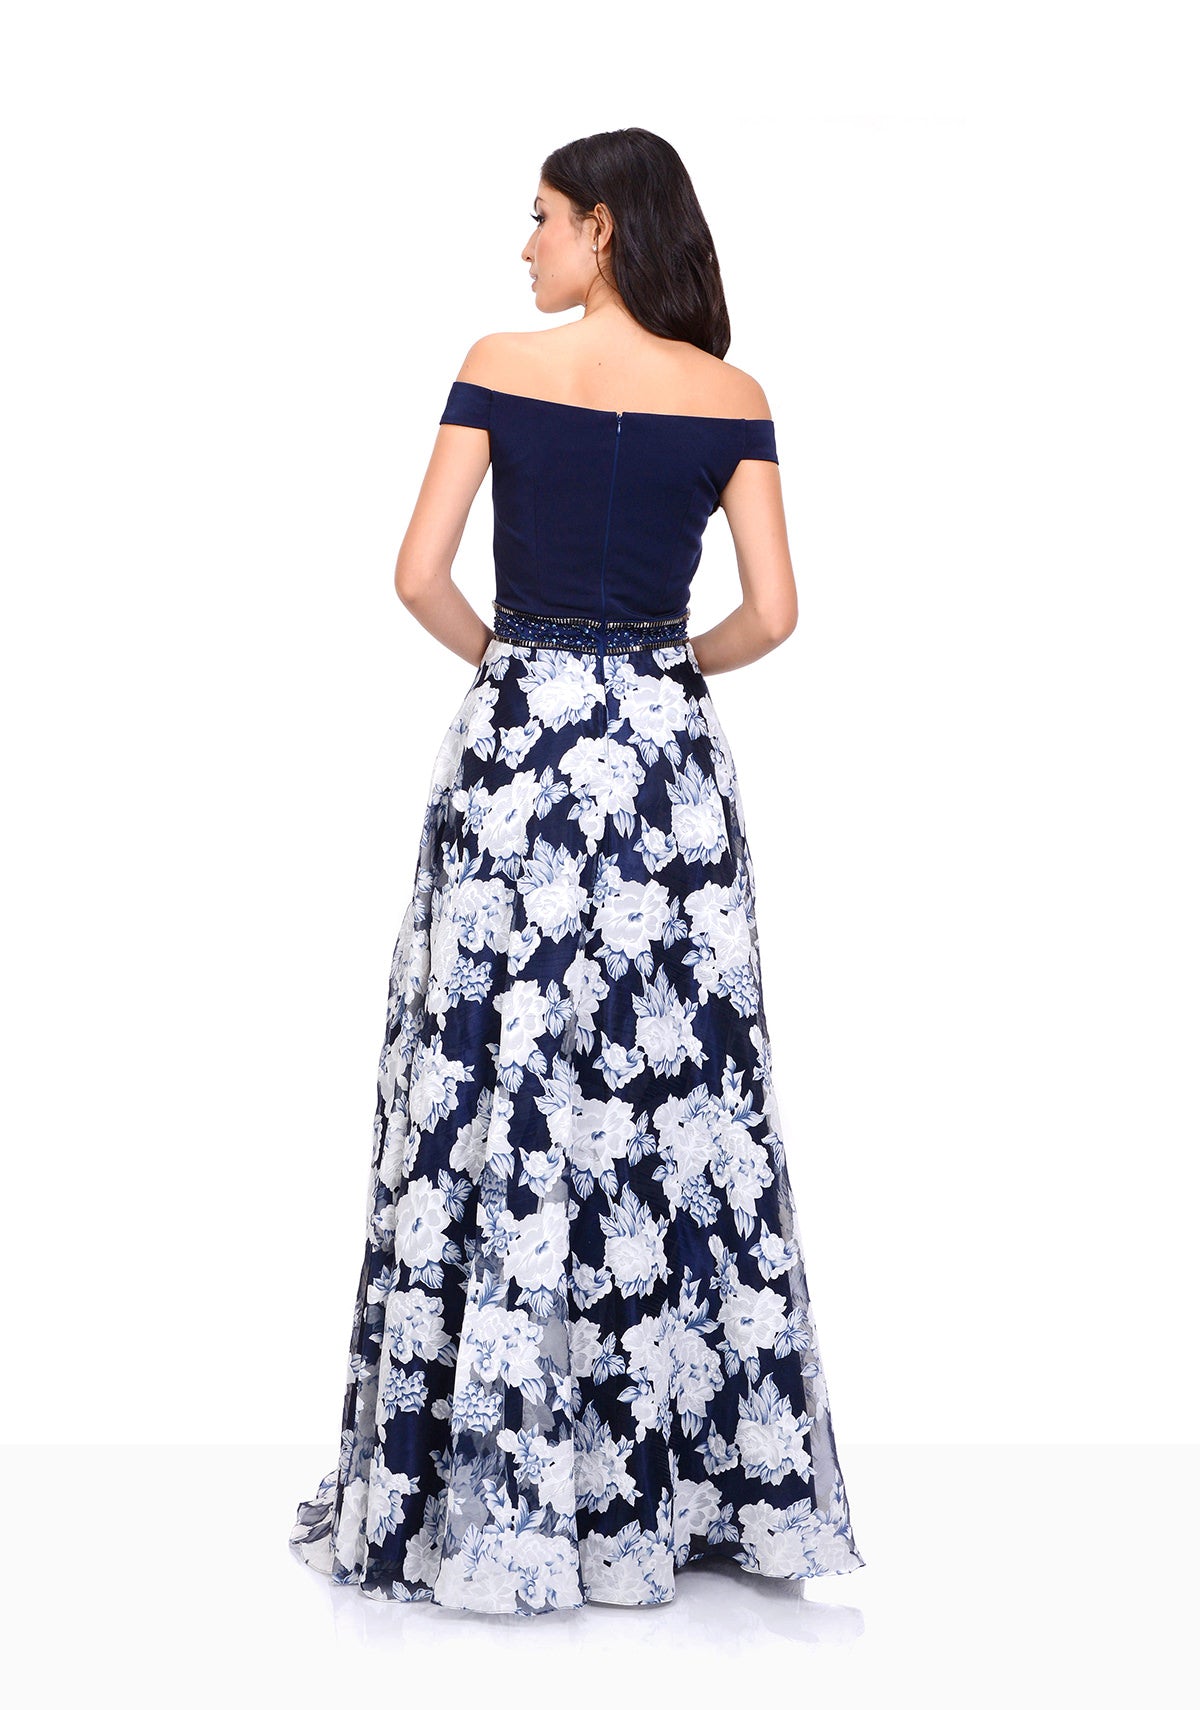 Floral navy A-line dress with embellished glitter belt. Off the shoulder navy neckline. Unique and stylish prom and evening dress.